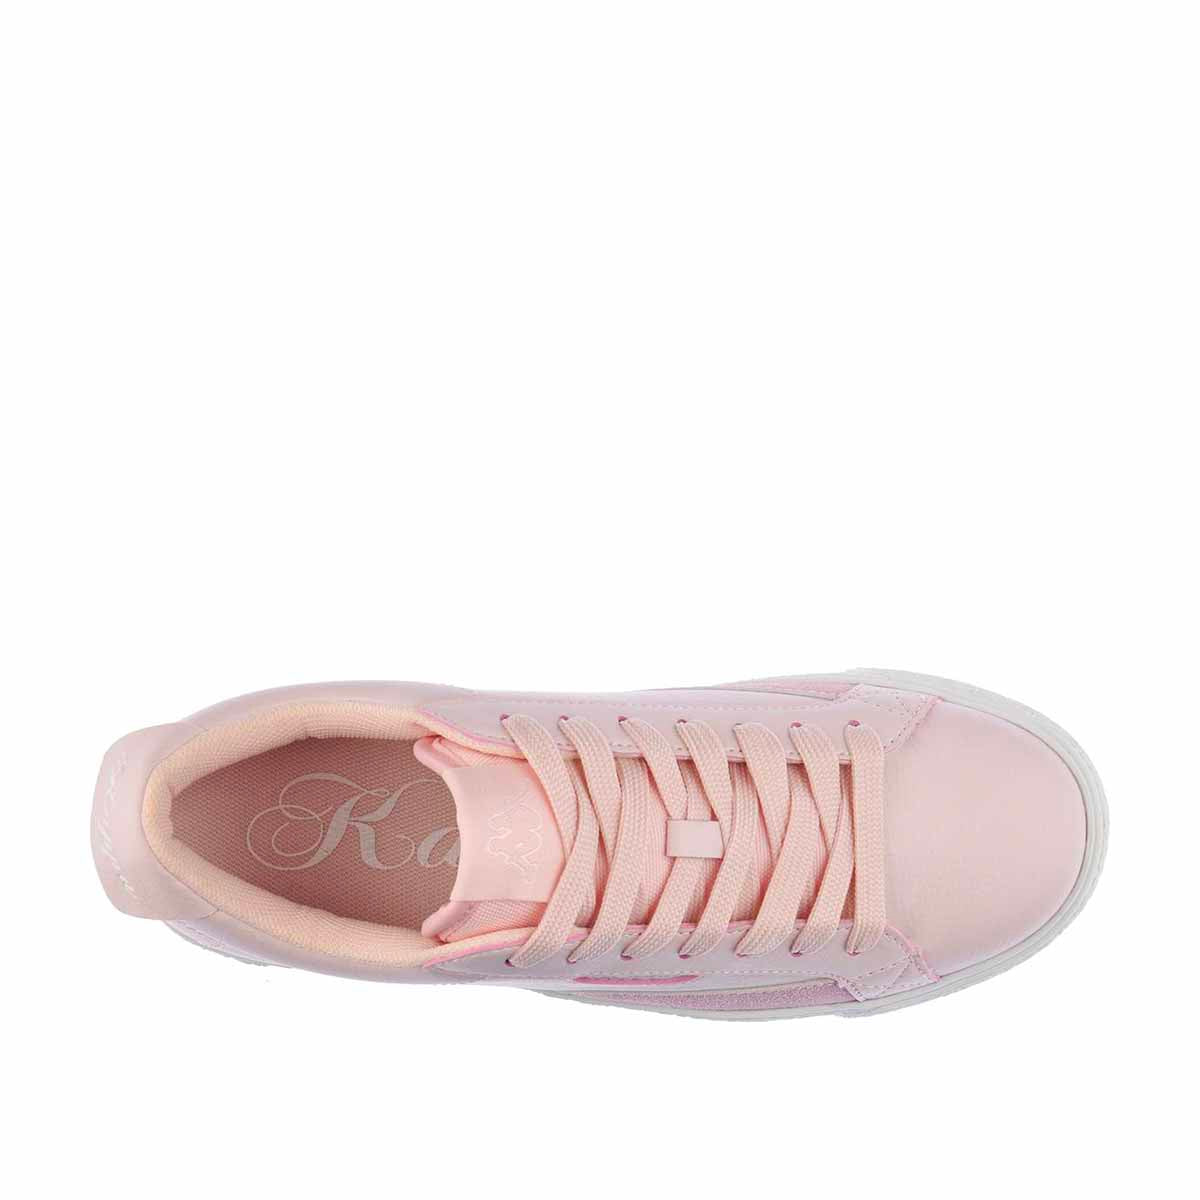 Chaussures Astrid Rose Femme